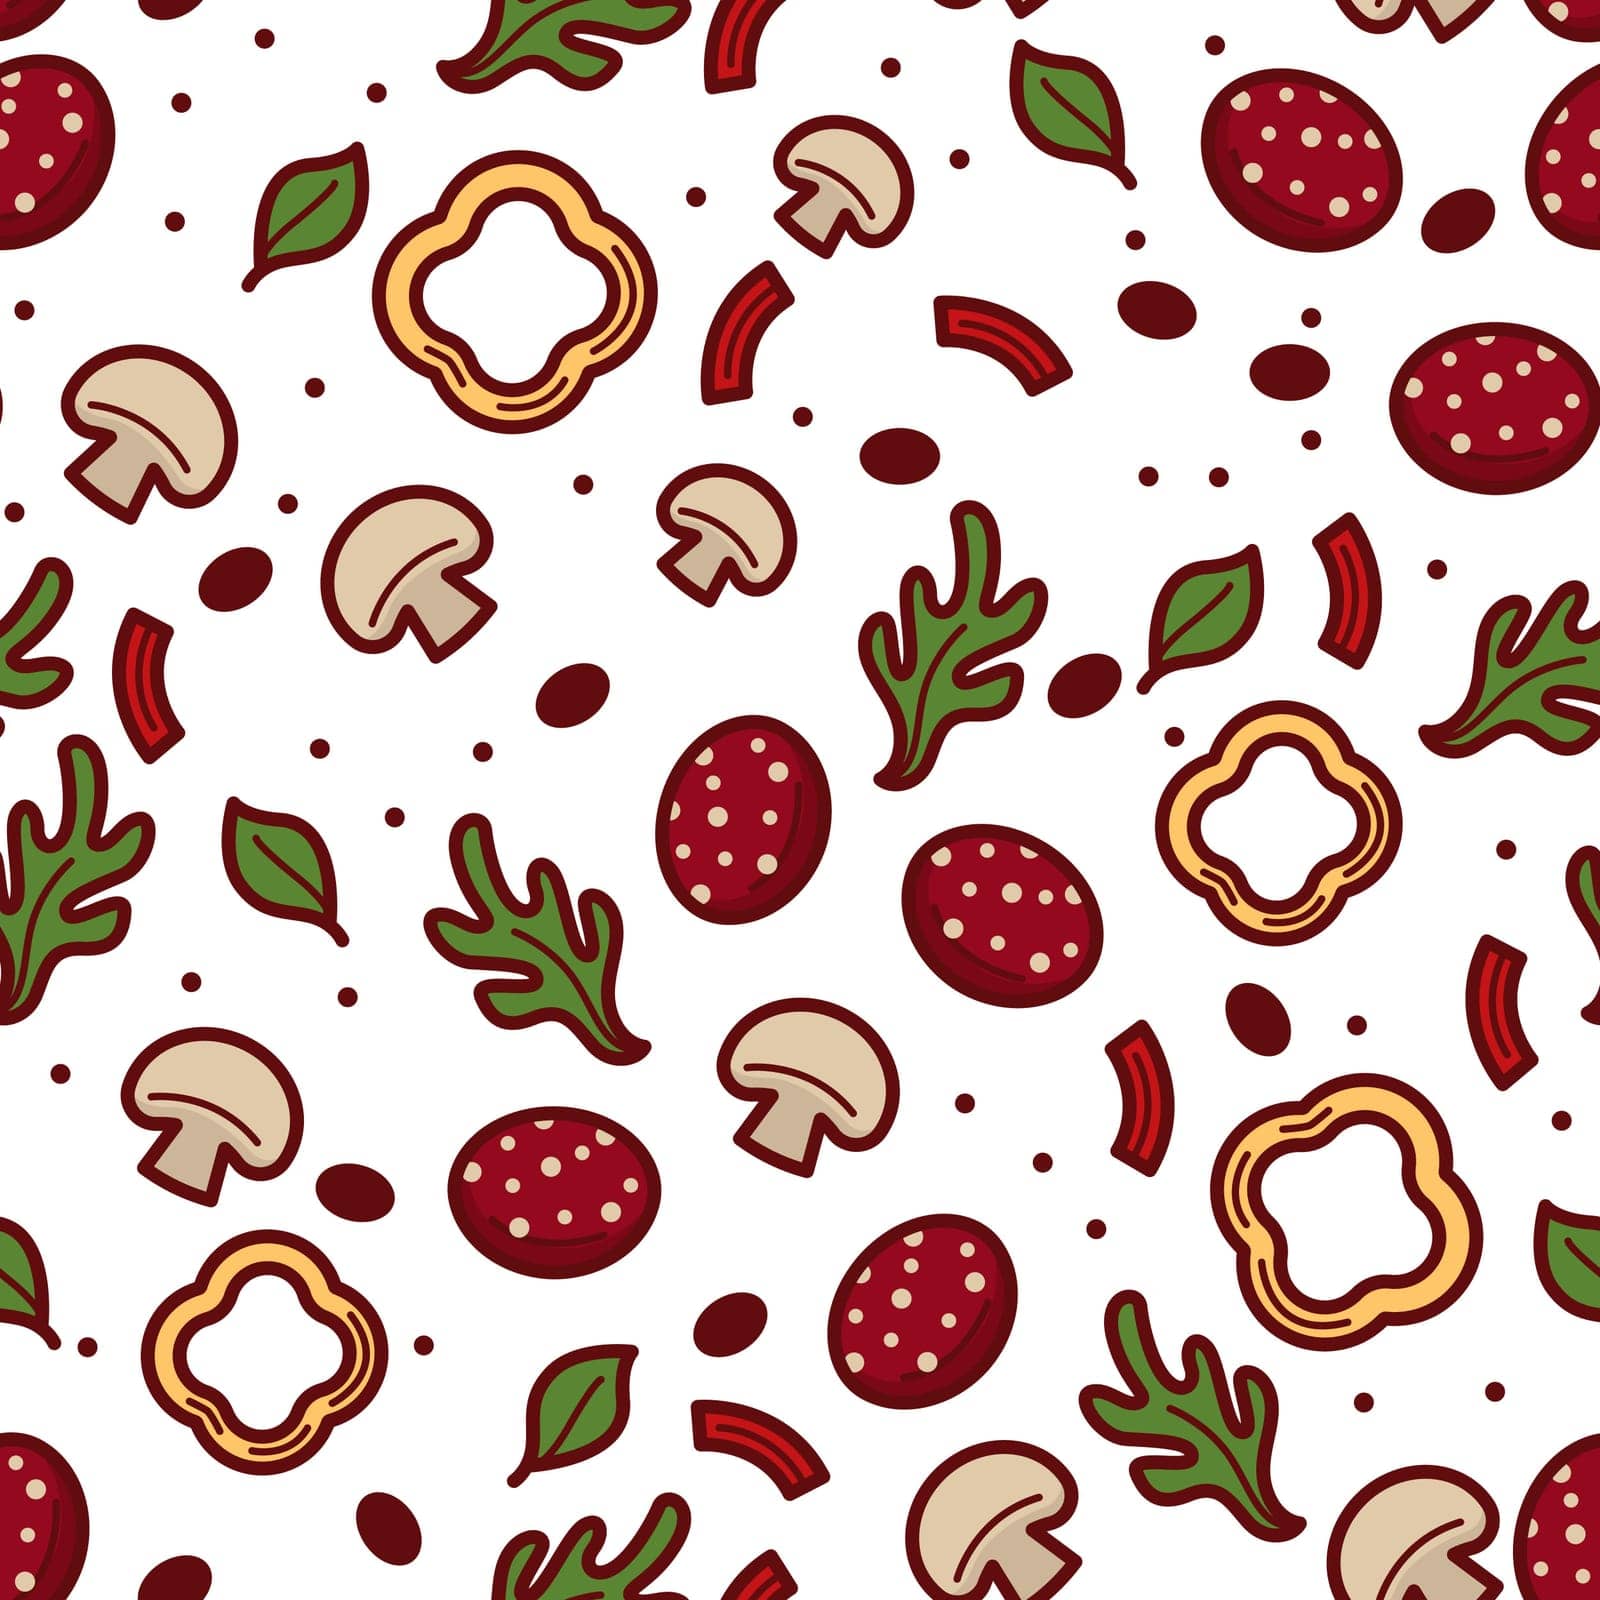 Herbs and spices, basil and leaves with mushroom and sweet paprika or bell pepper. Tasty mix of vegetables and greenery, gastronomy. Seamless pattern, background or print, vector in flat style